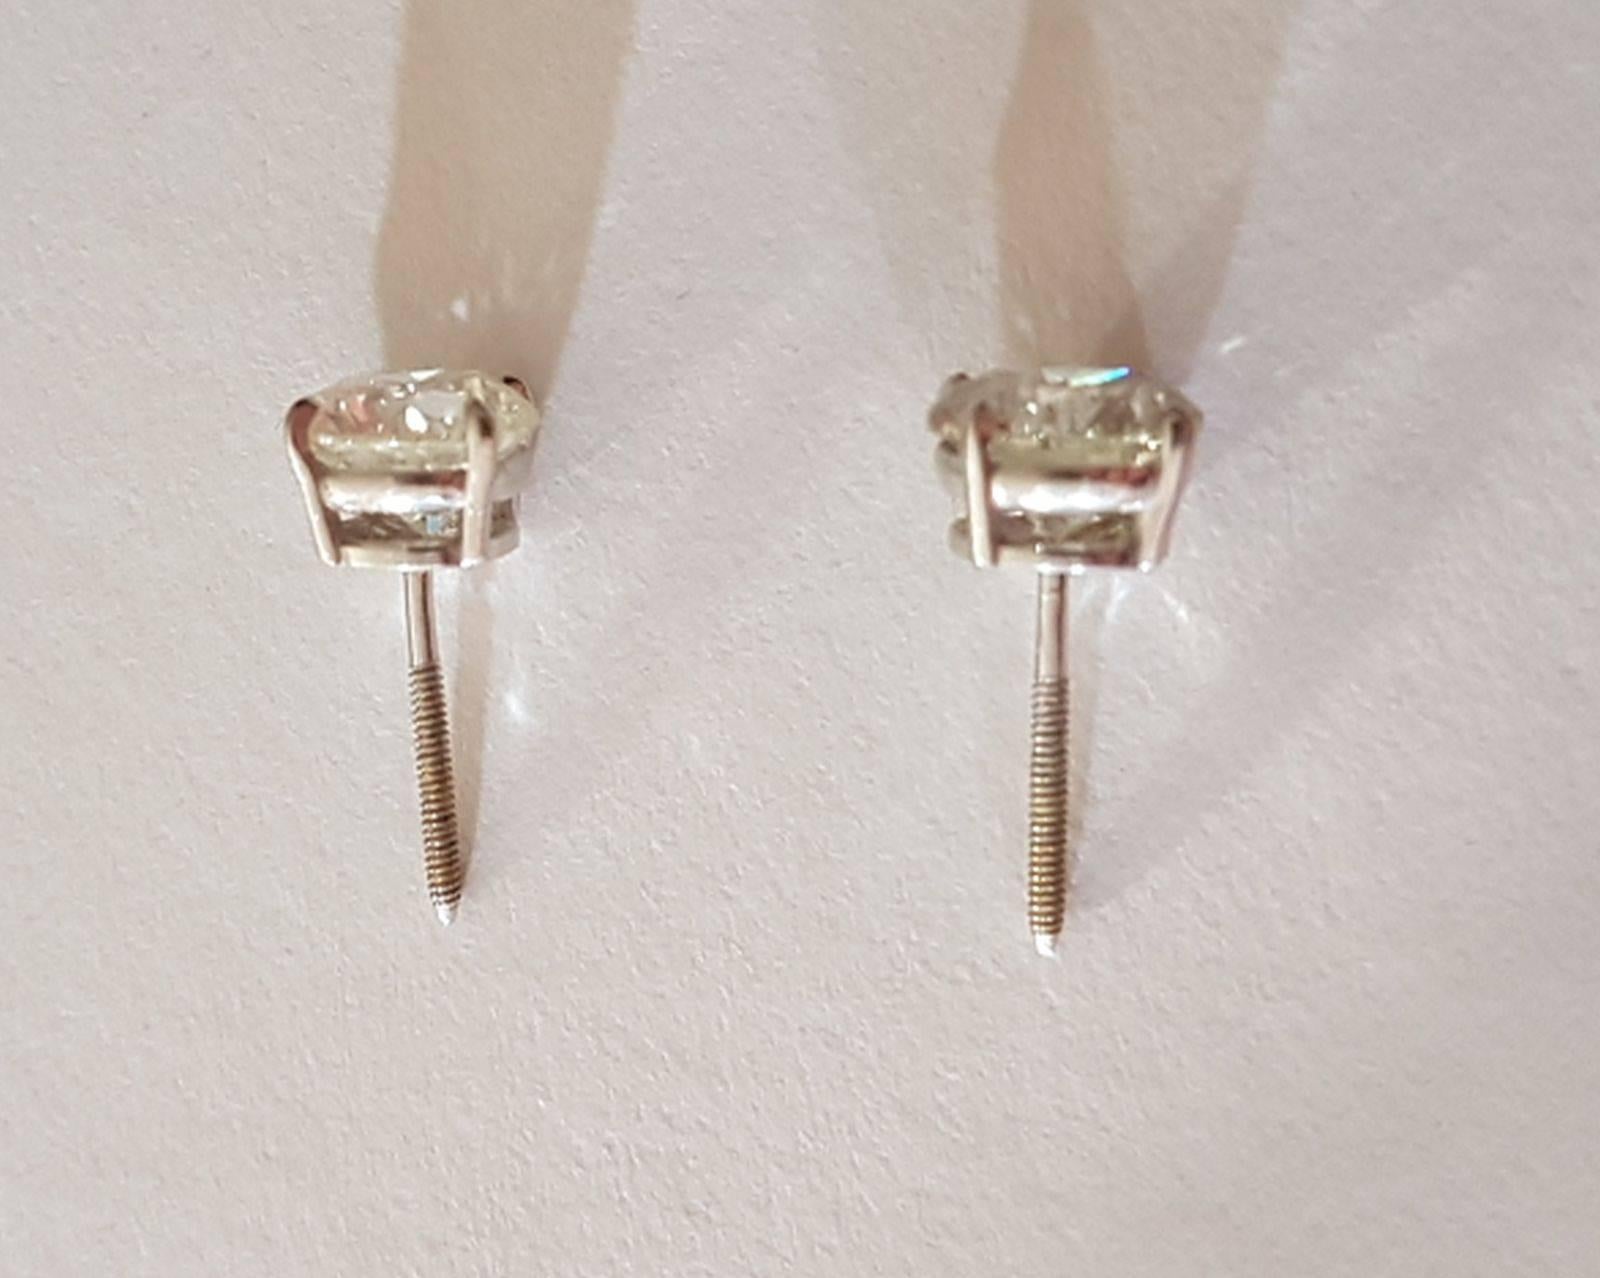 Lovely simple diamond earstuds.   The diamonds are a great size to make a statement.  Just under half a carat in each ear stud.  J colour SI2 - clean to the naked eye with lots of sparkle and lovely and white when worn.

Set in 18 ct white gold with